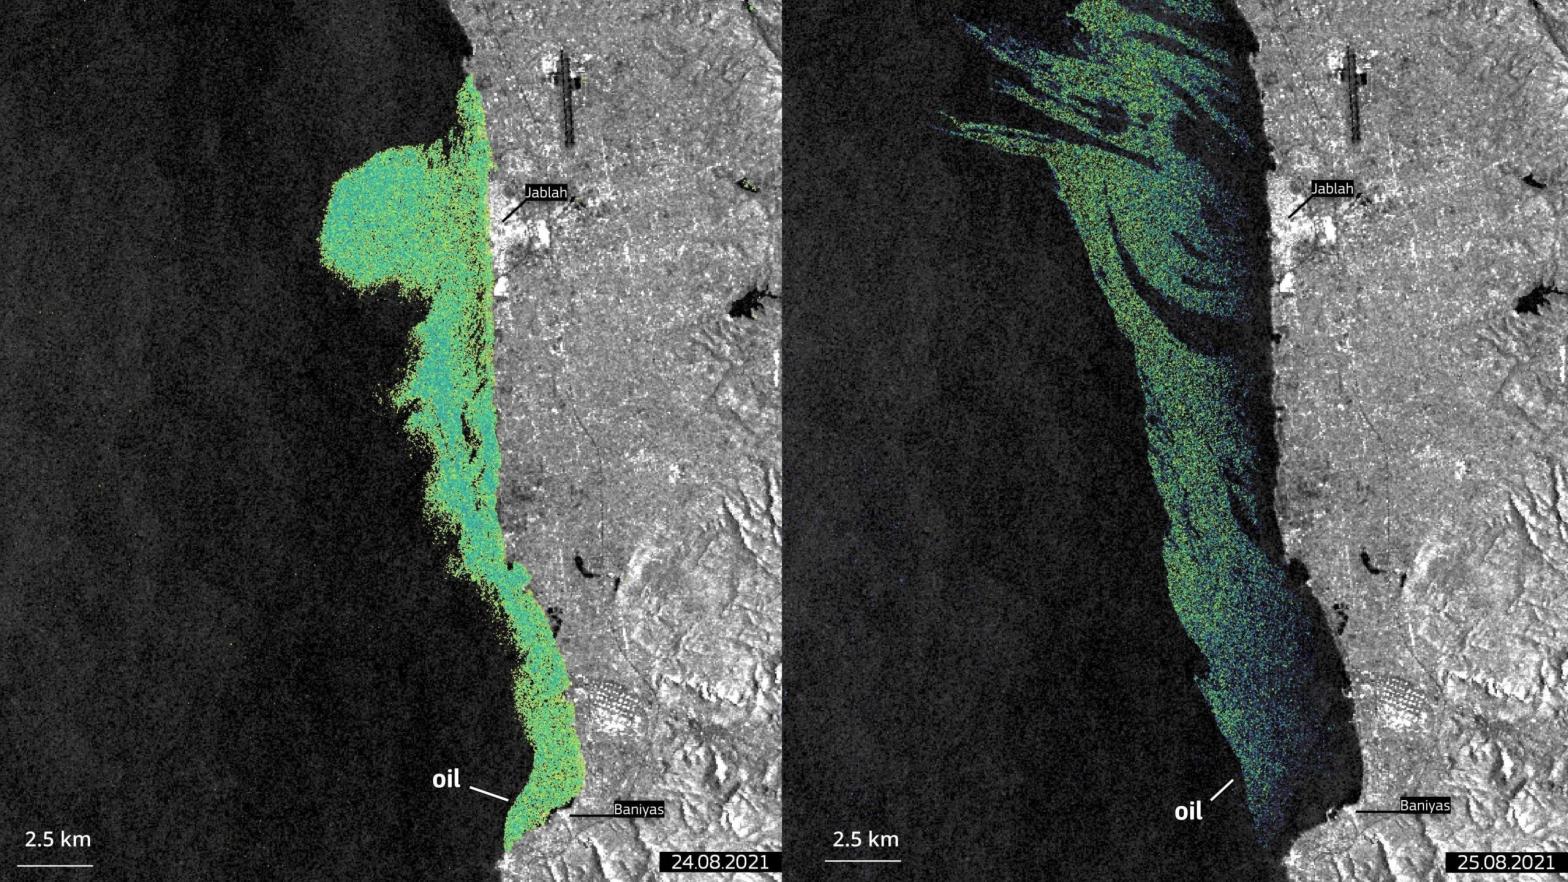 On 24 and 25 August 2021, the Copernicus Sentinel-1 satellites have imaged an oil spill on the coast of Syria. It has since spread to the west. (Image: European Union, Copernicus Sentinel-1)